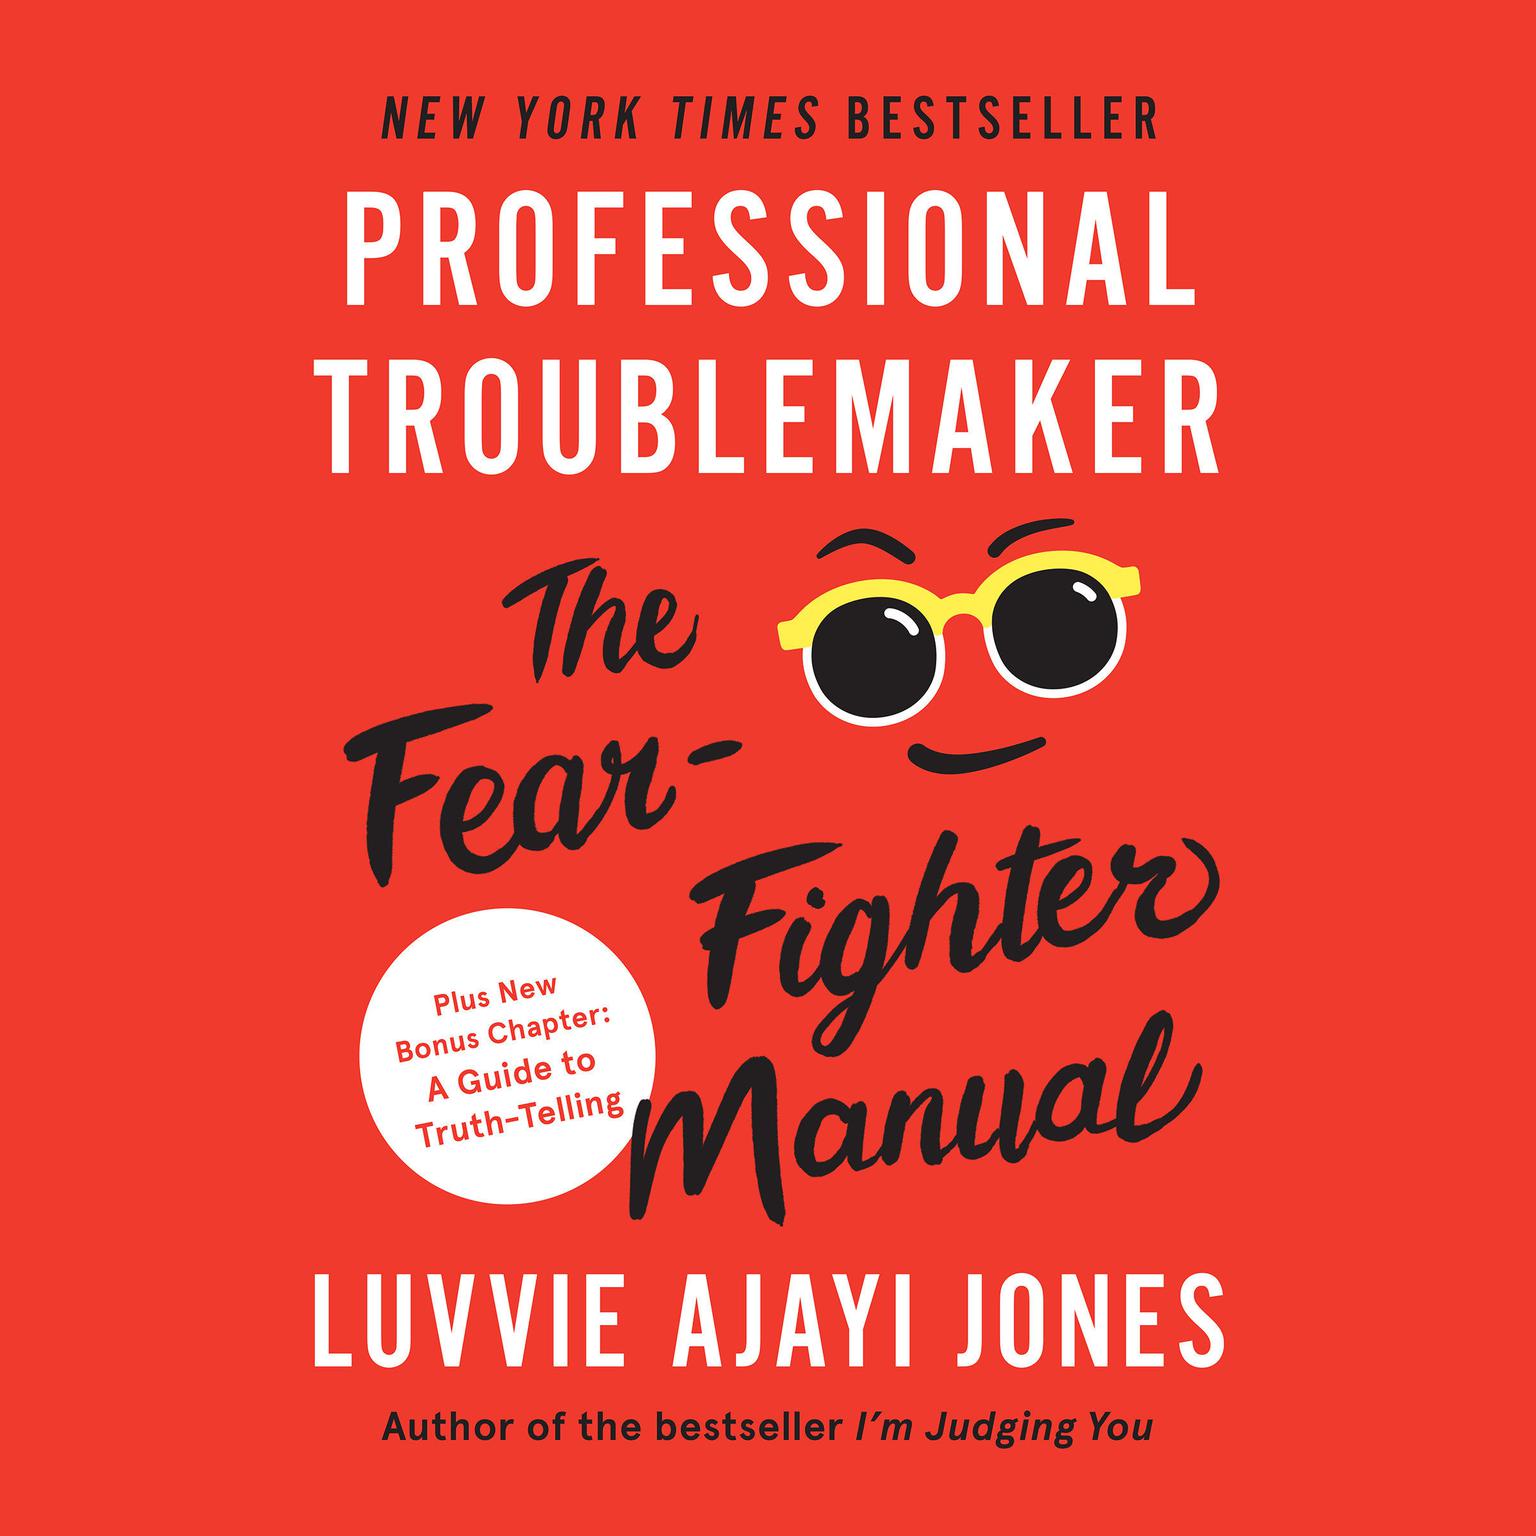 Professional Troublemaker: The Fear-Fighter Manual Audiobook, by Luvvie Ajayi Jones